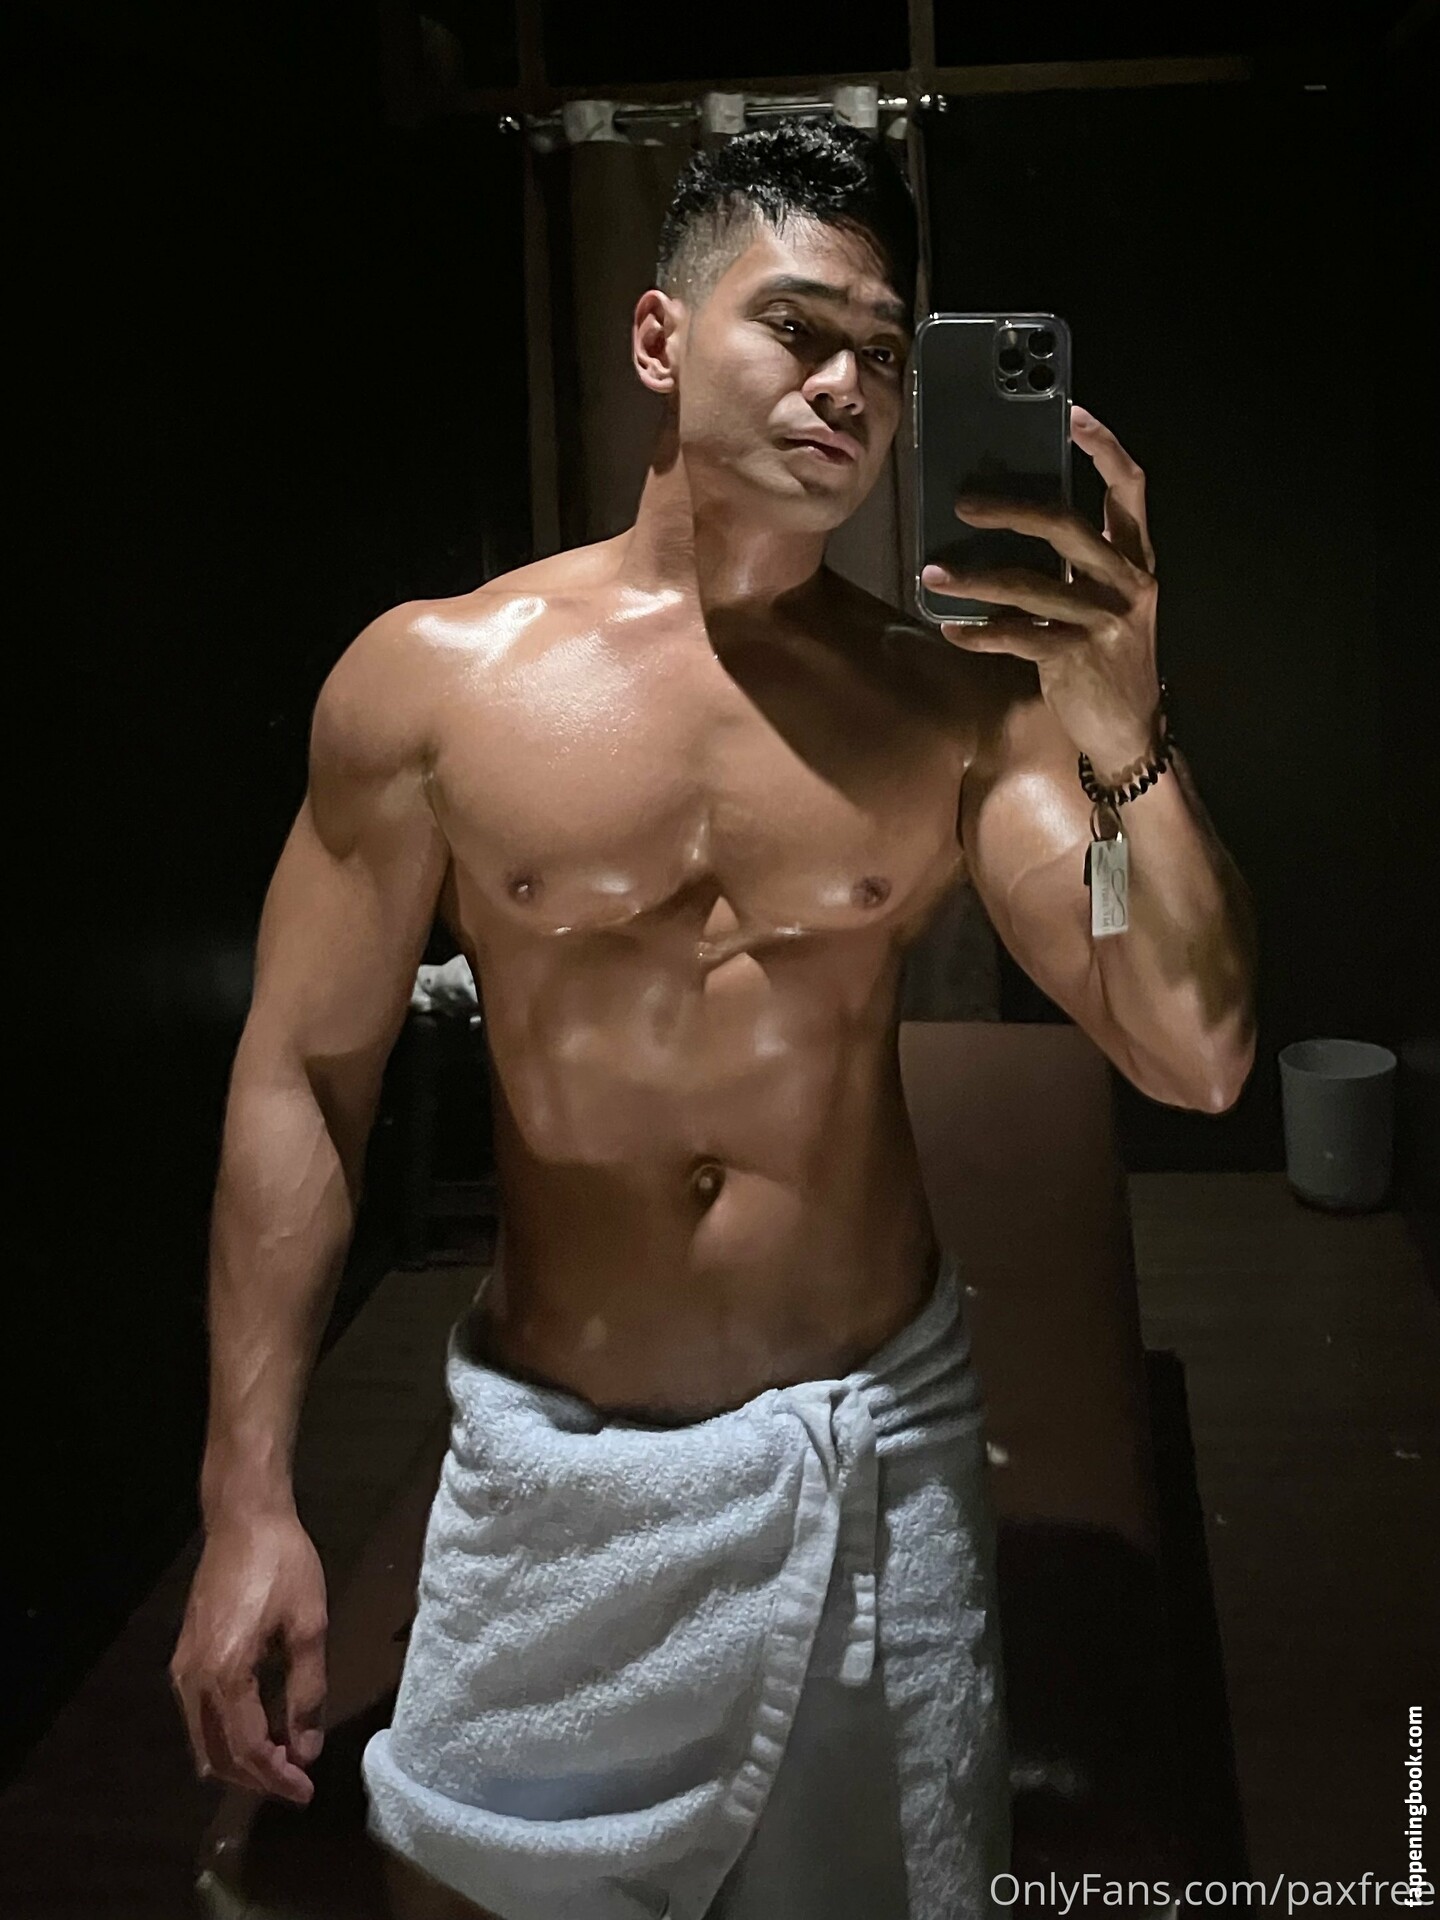 paoloamoresfree Nude OnlyFans Leaks